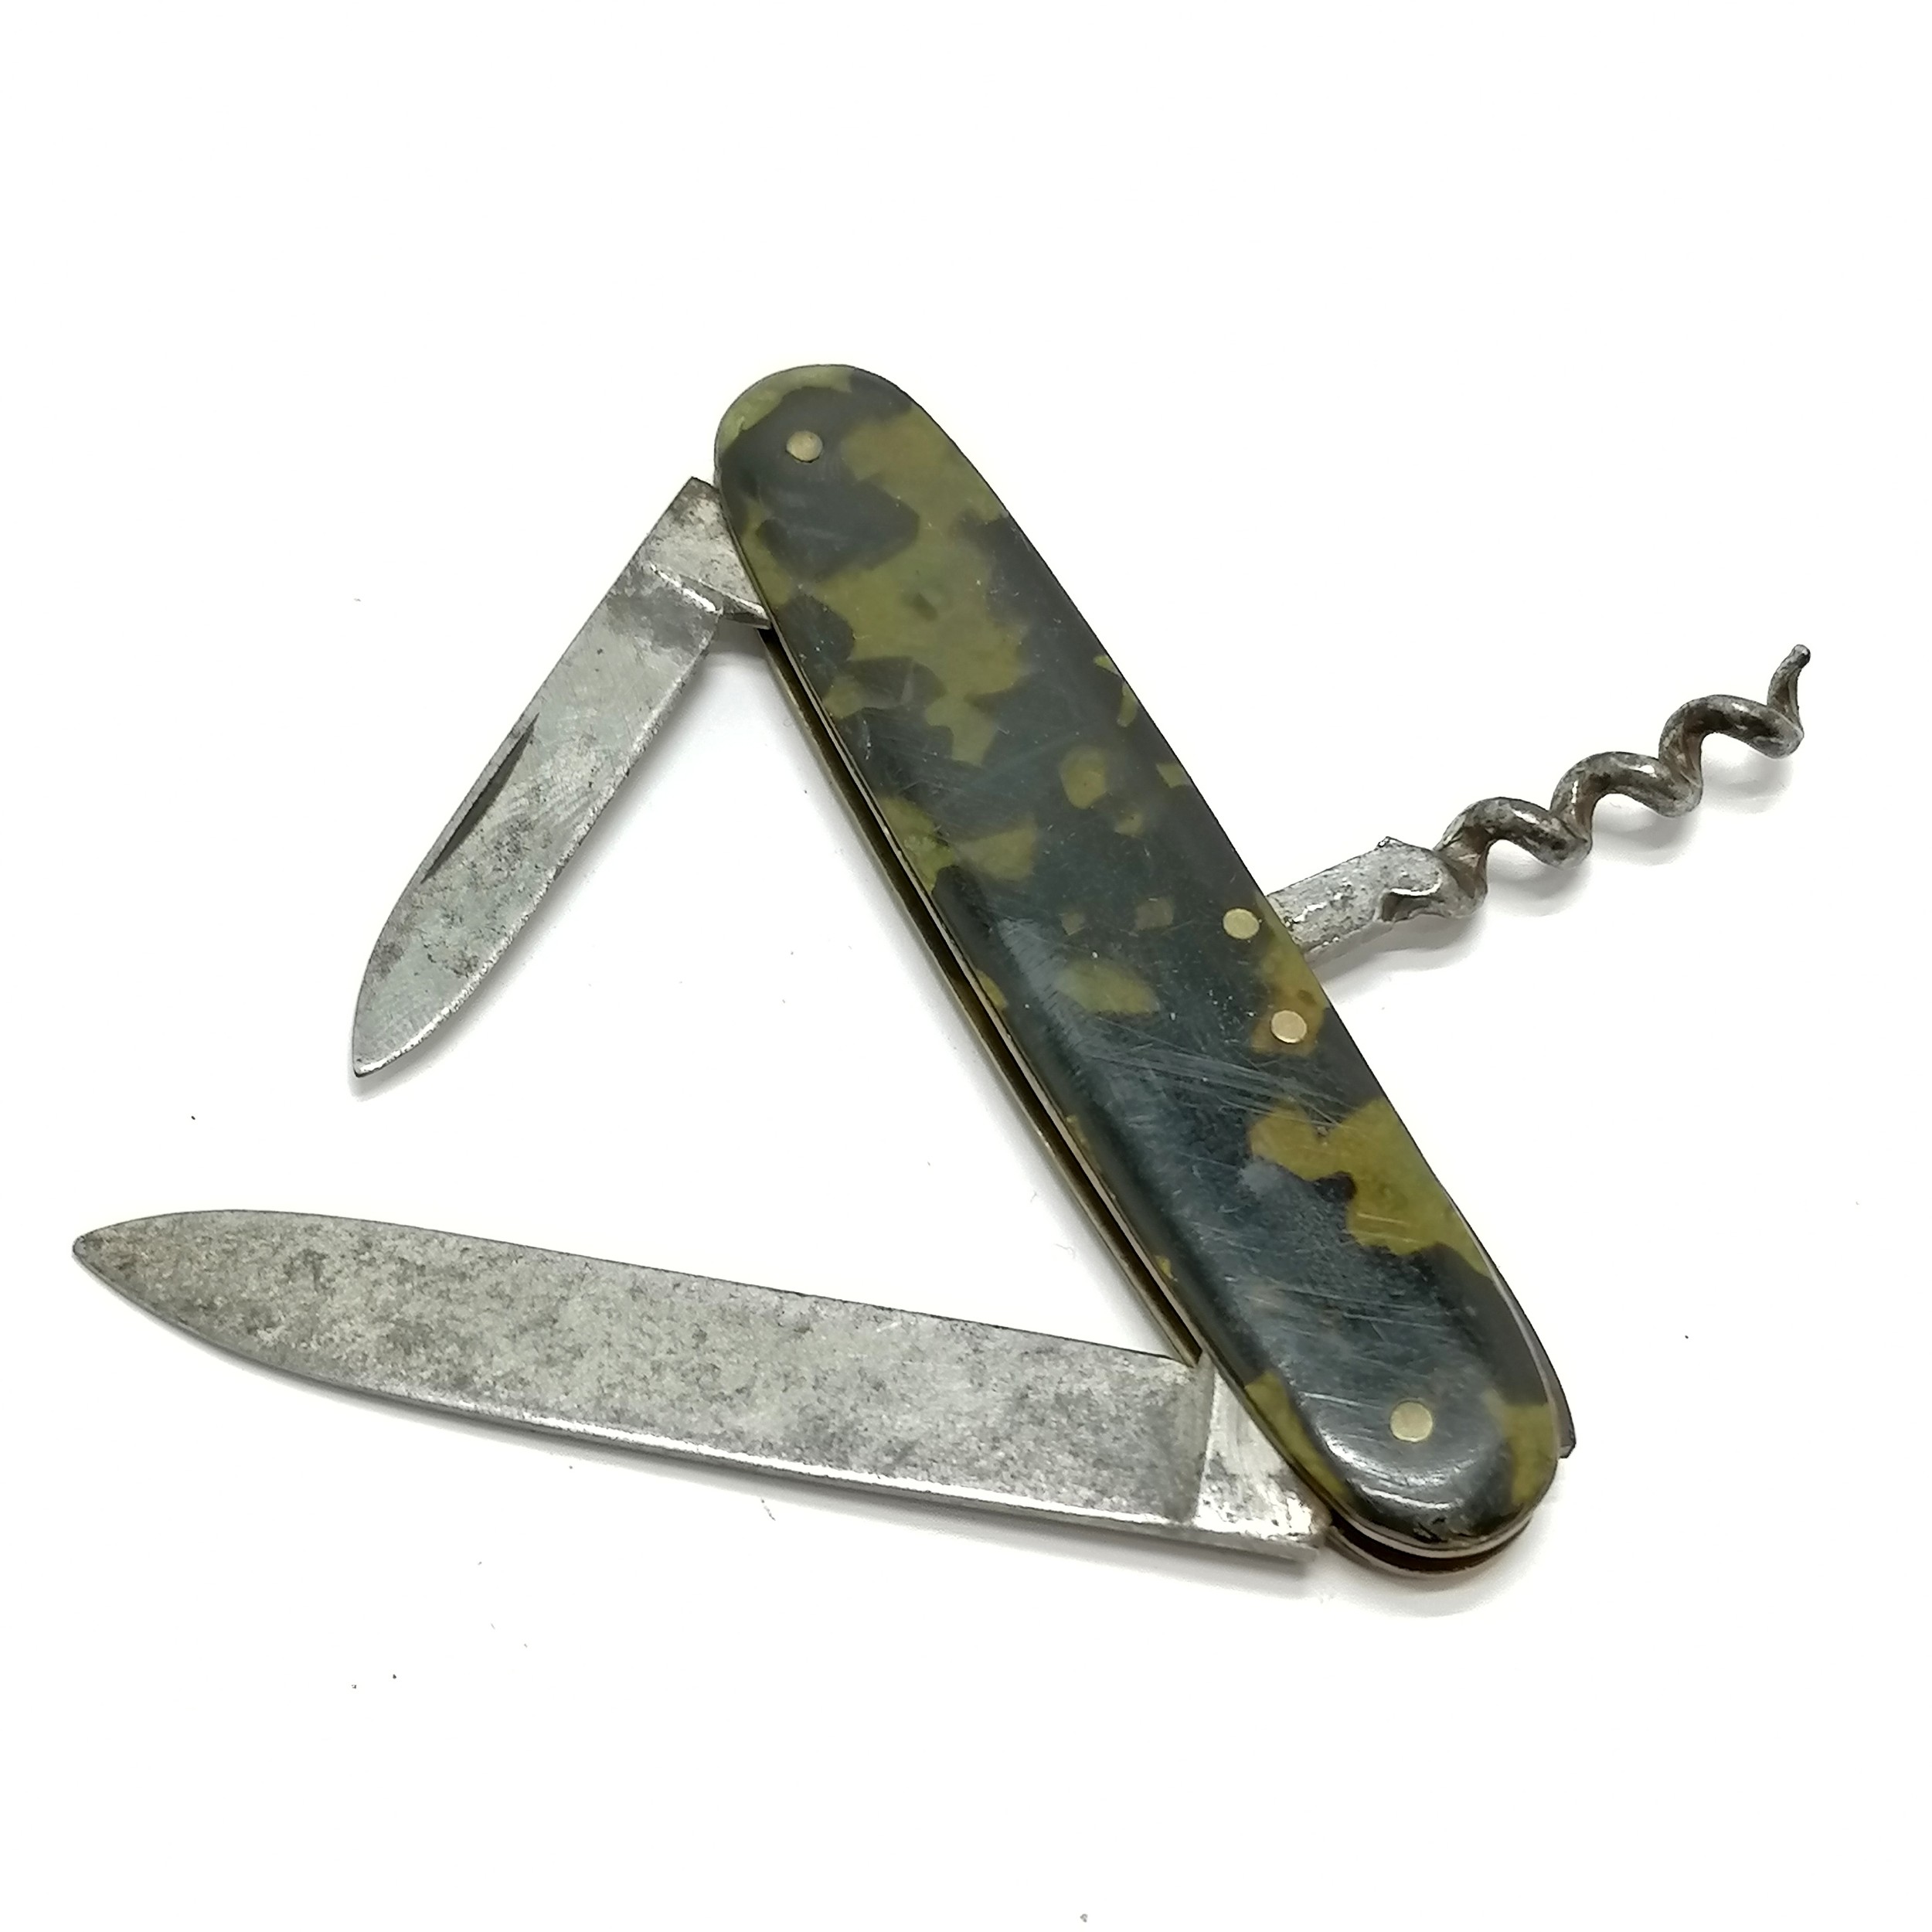 Unusual doubled bladed penknife with corkscrew & faux tortoiseshell panels - total length 20cm ~ - Image 4 of 4